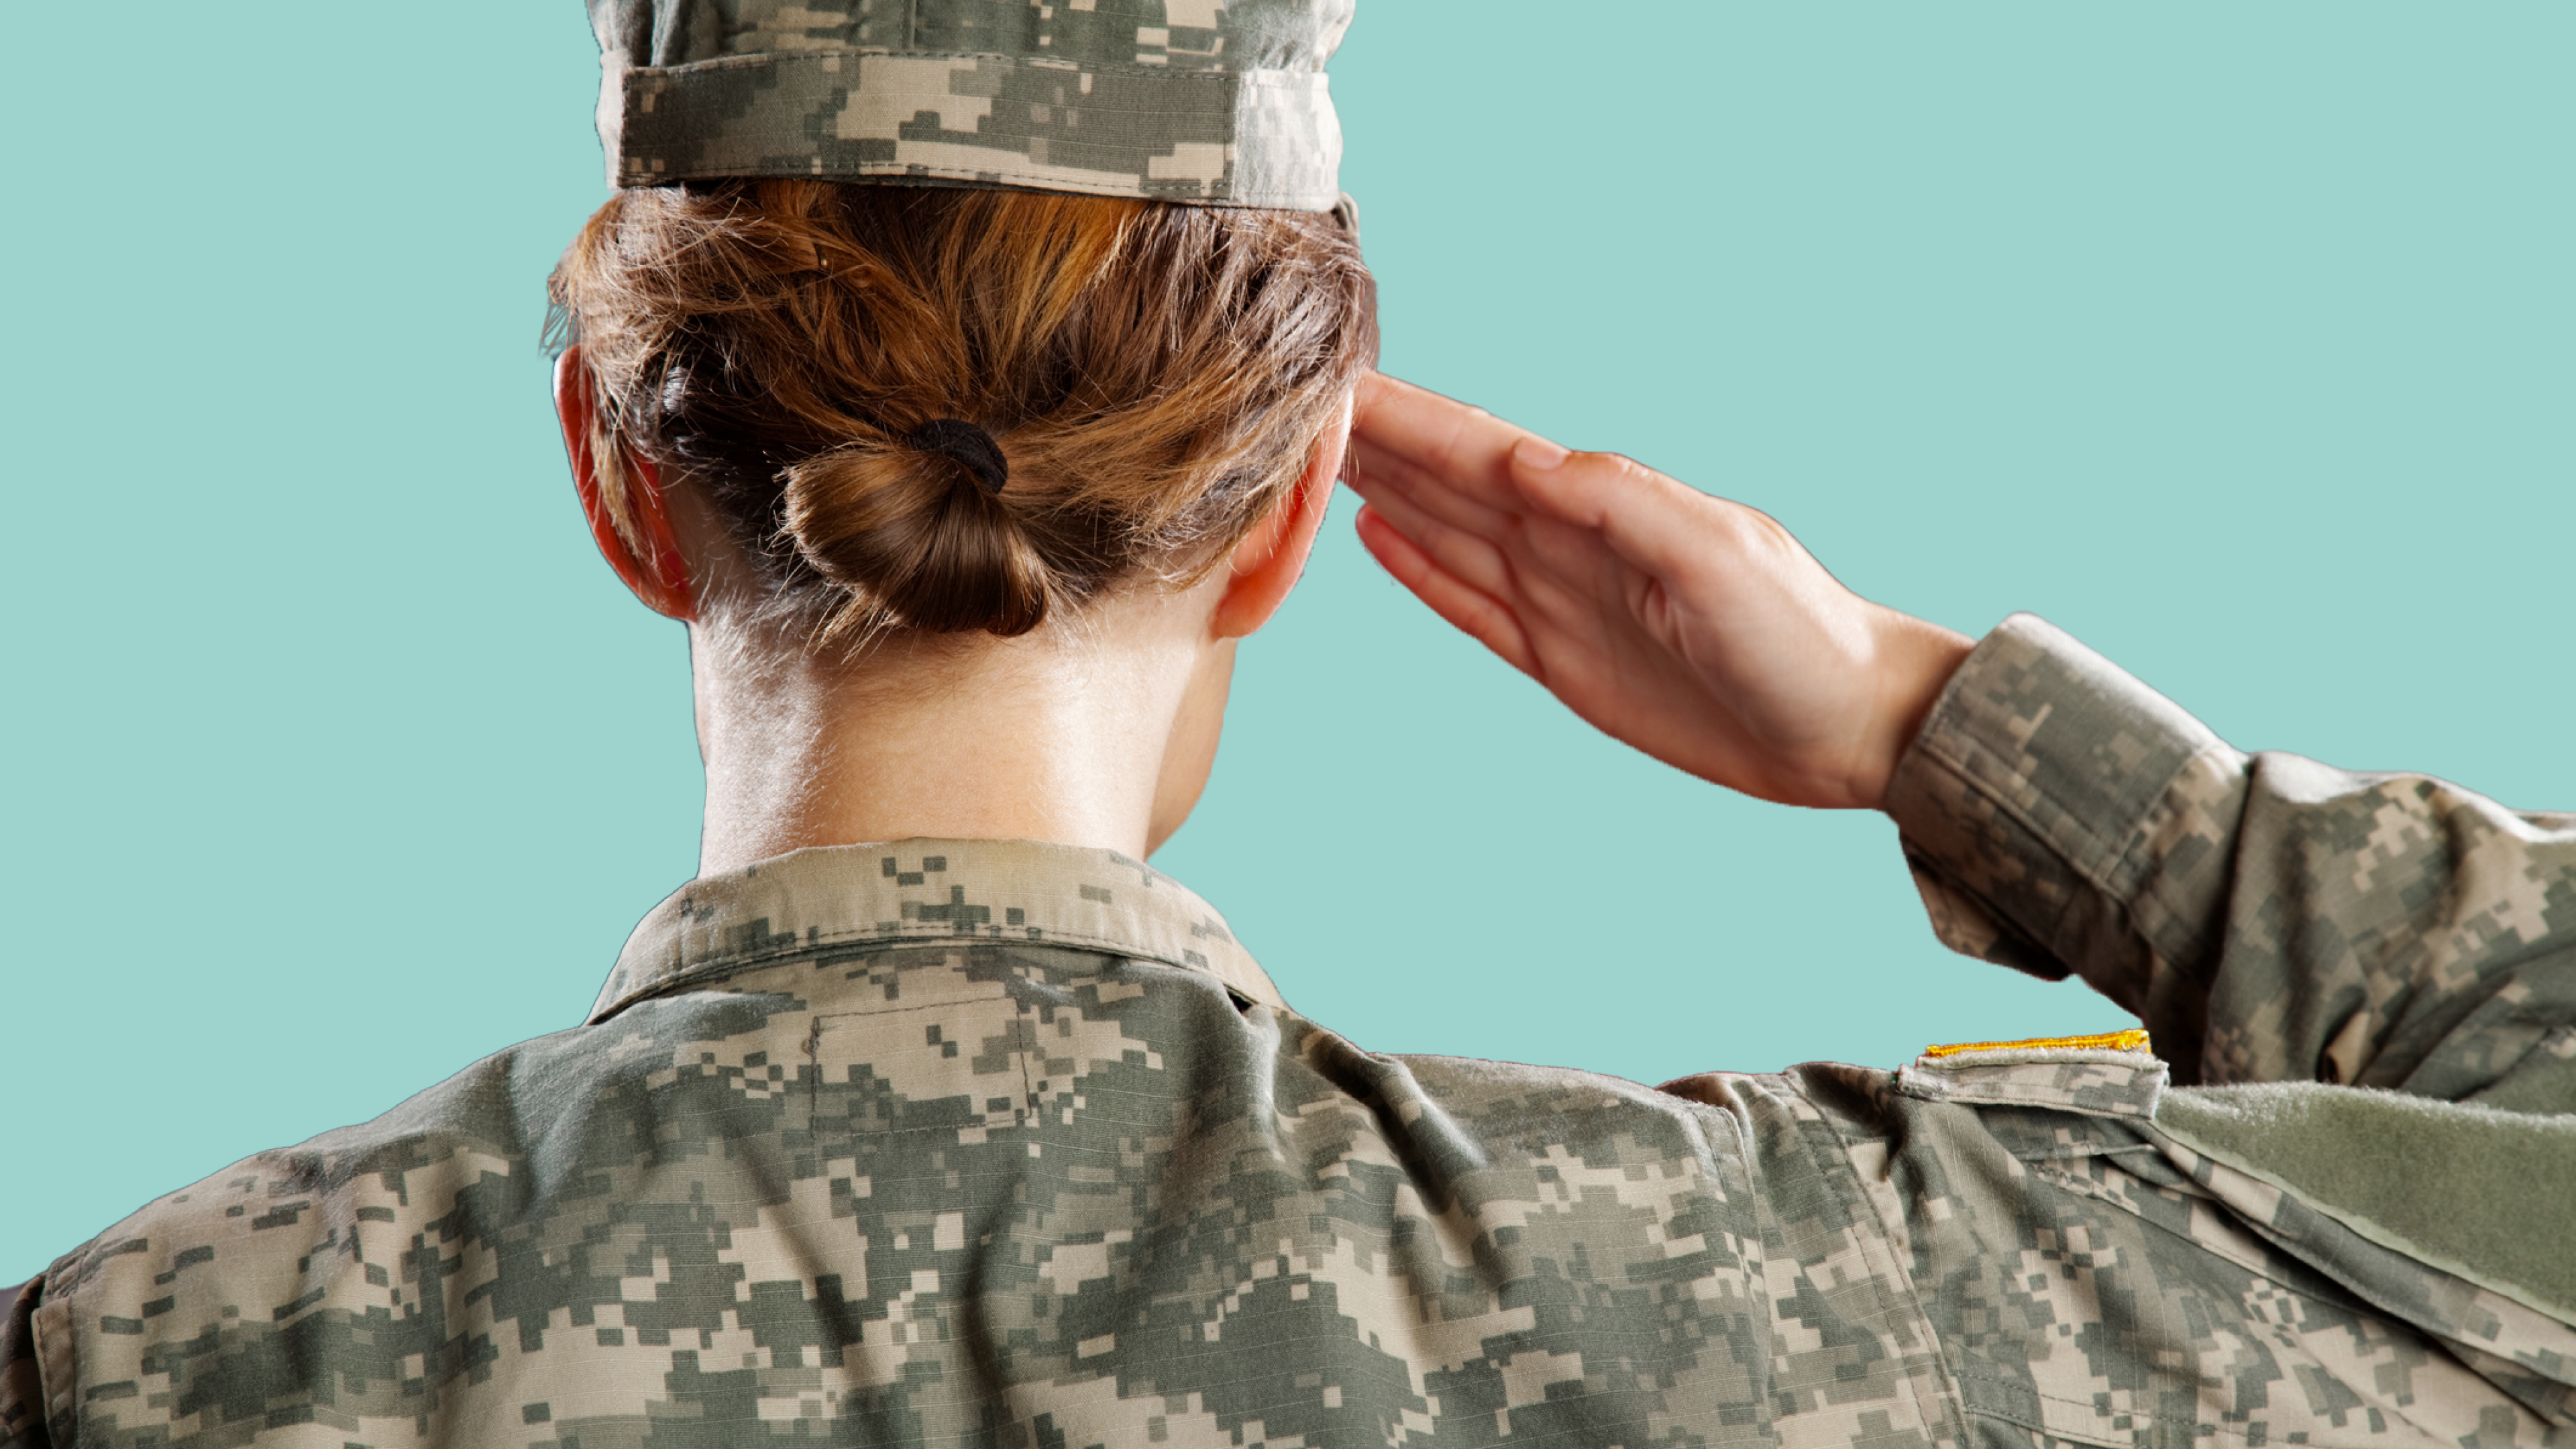 A woman wearing a US armed forces uniform standing in salute